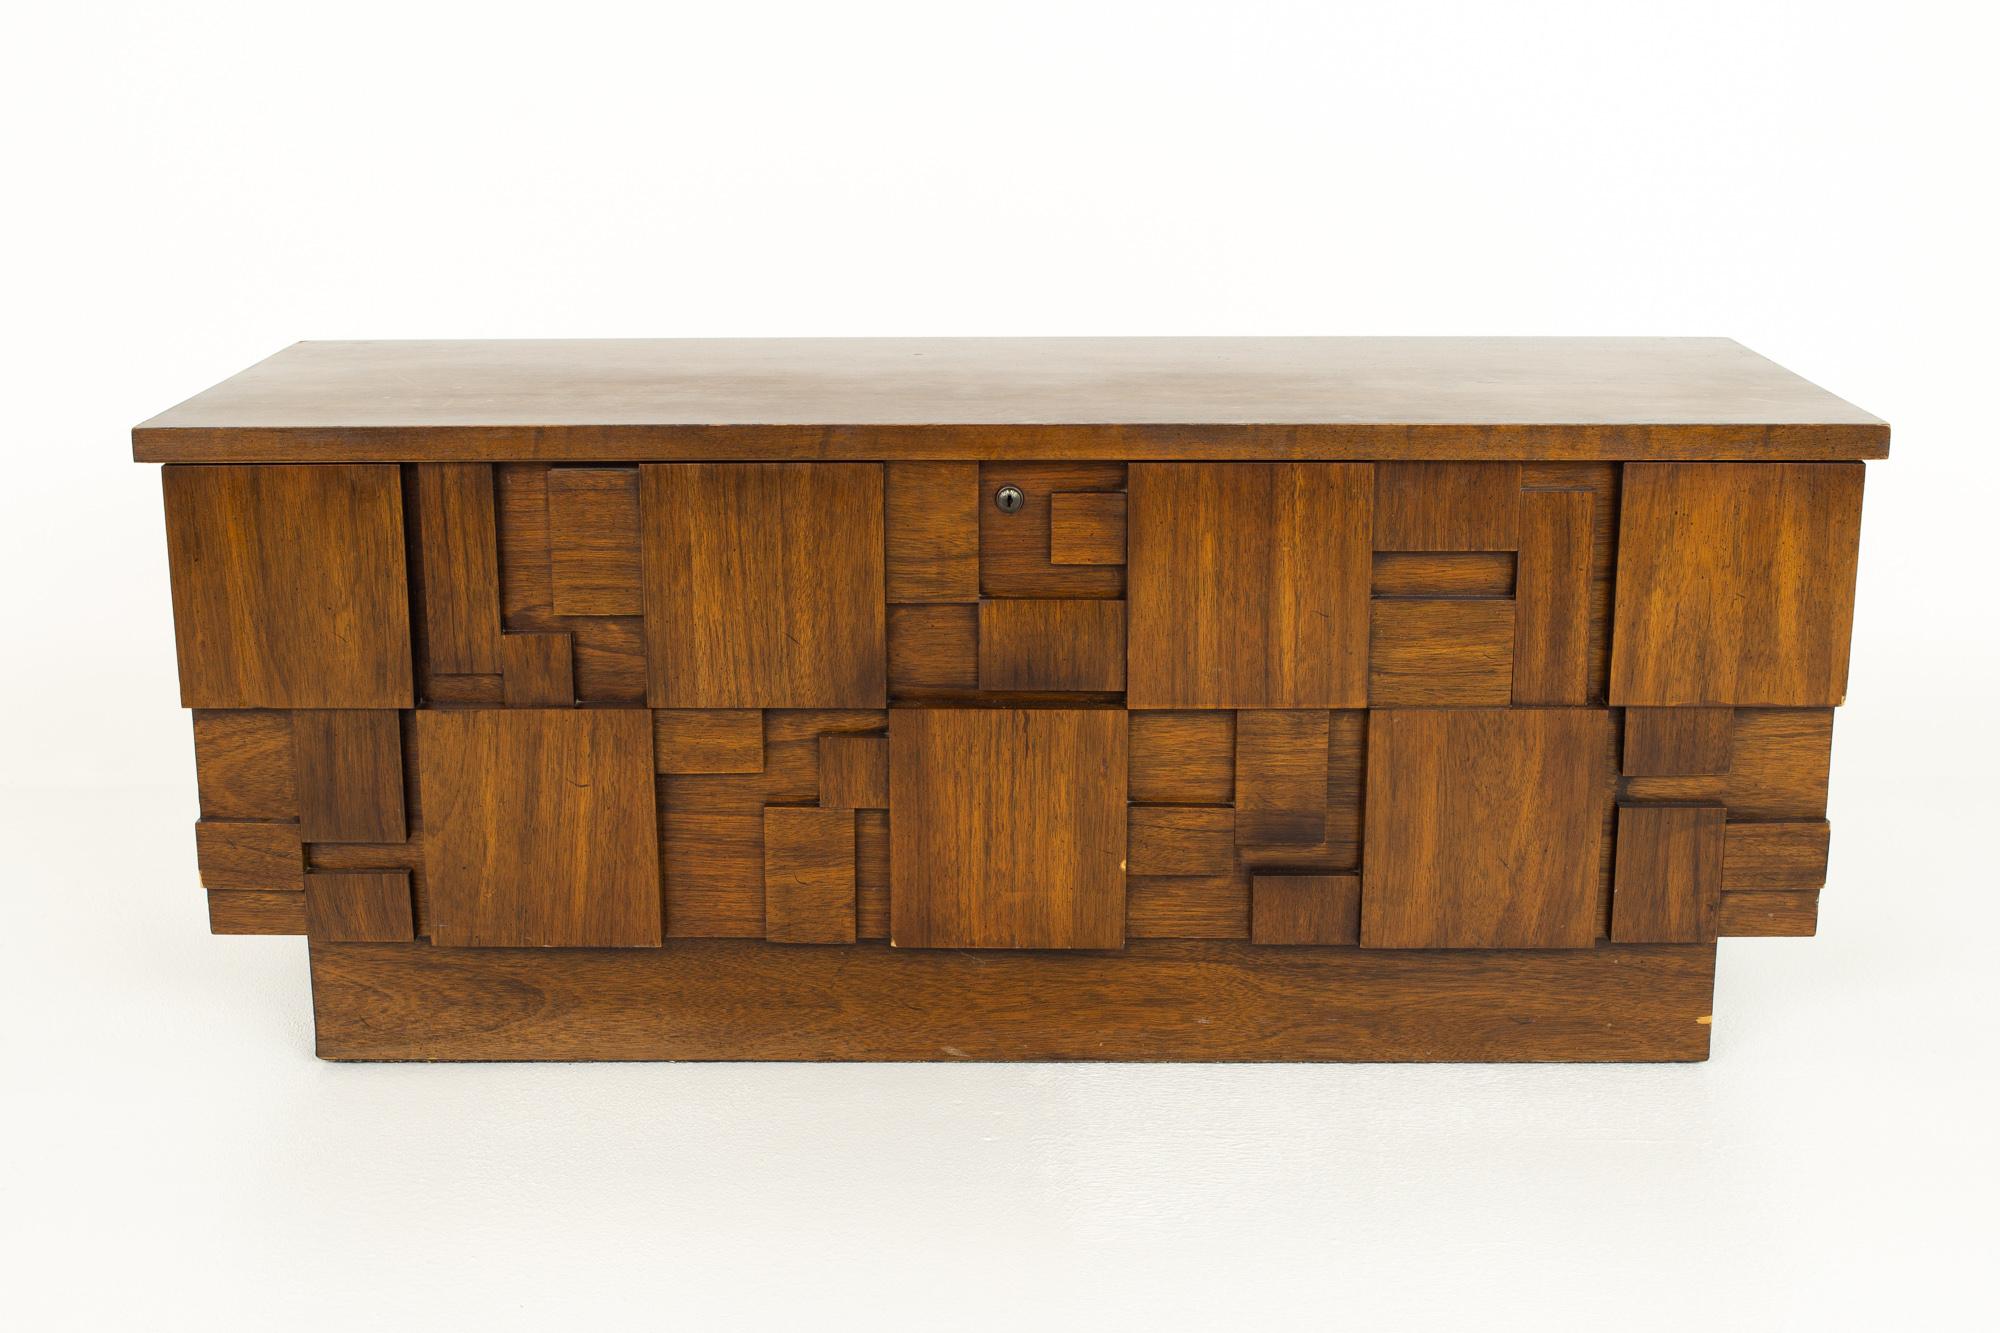 Lane Staccato Brutalist mid century walnut storage bench

This bench measures: 47.25 wide x 18 deep x 19 inches 

Special Note: Due to the potential hazard to children, legally we must remove the lock before shipping unless you specifically